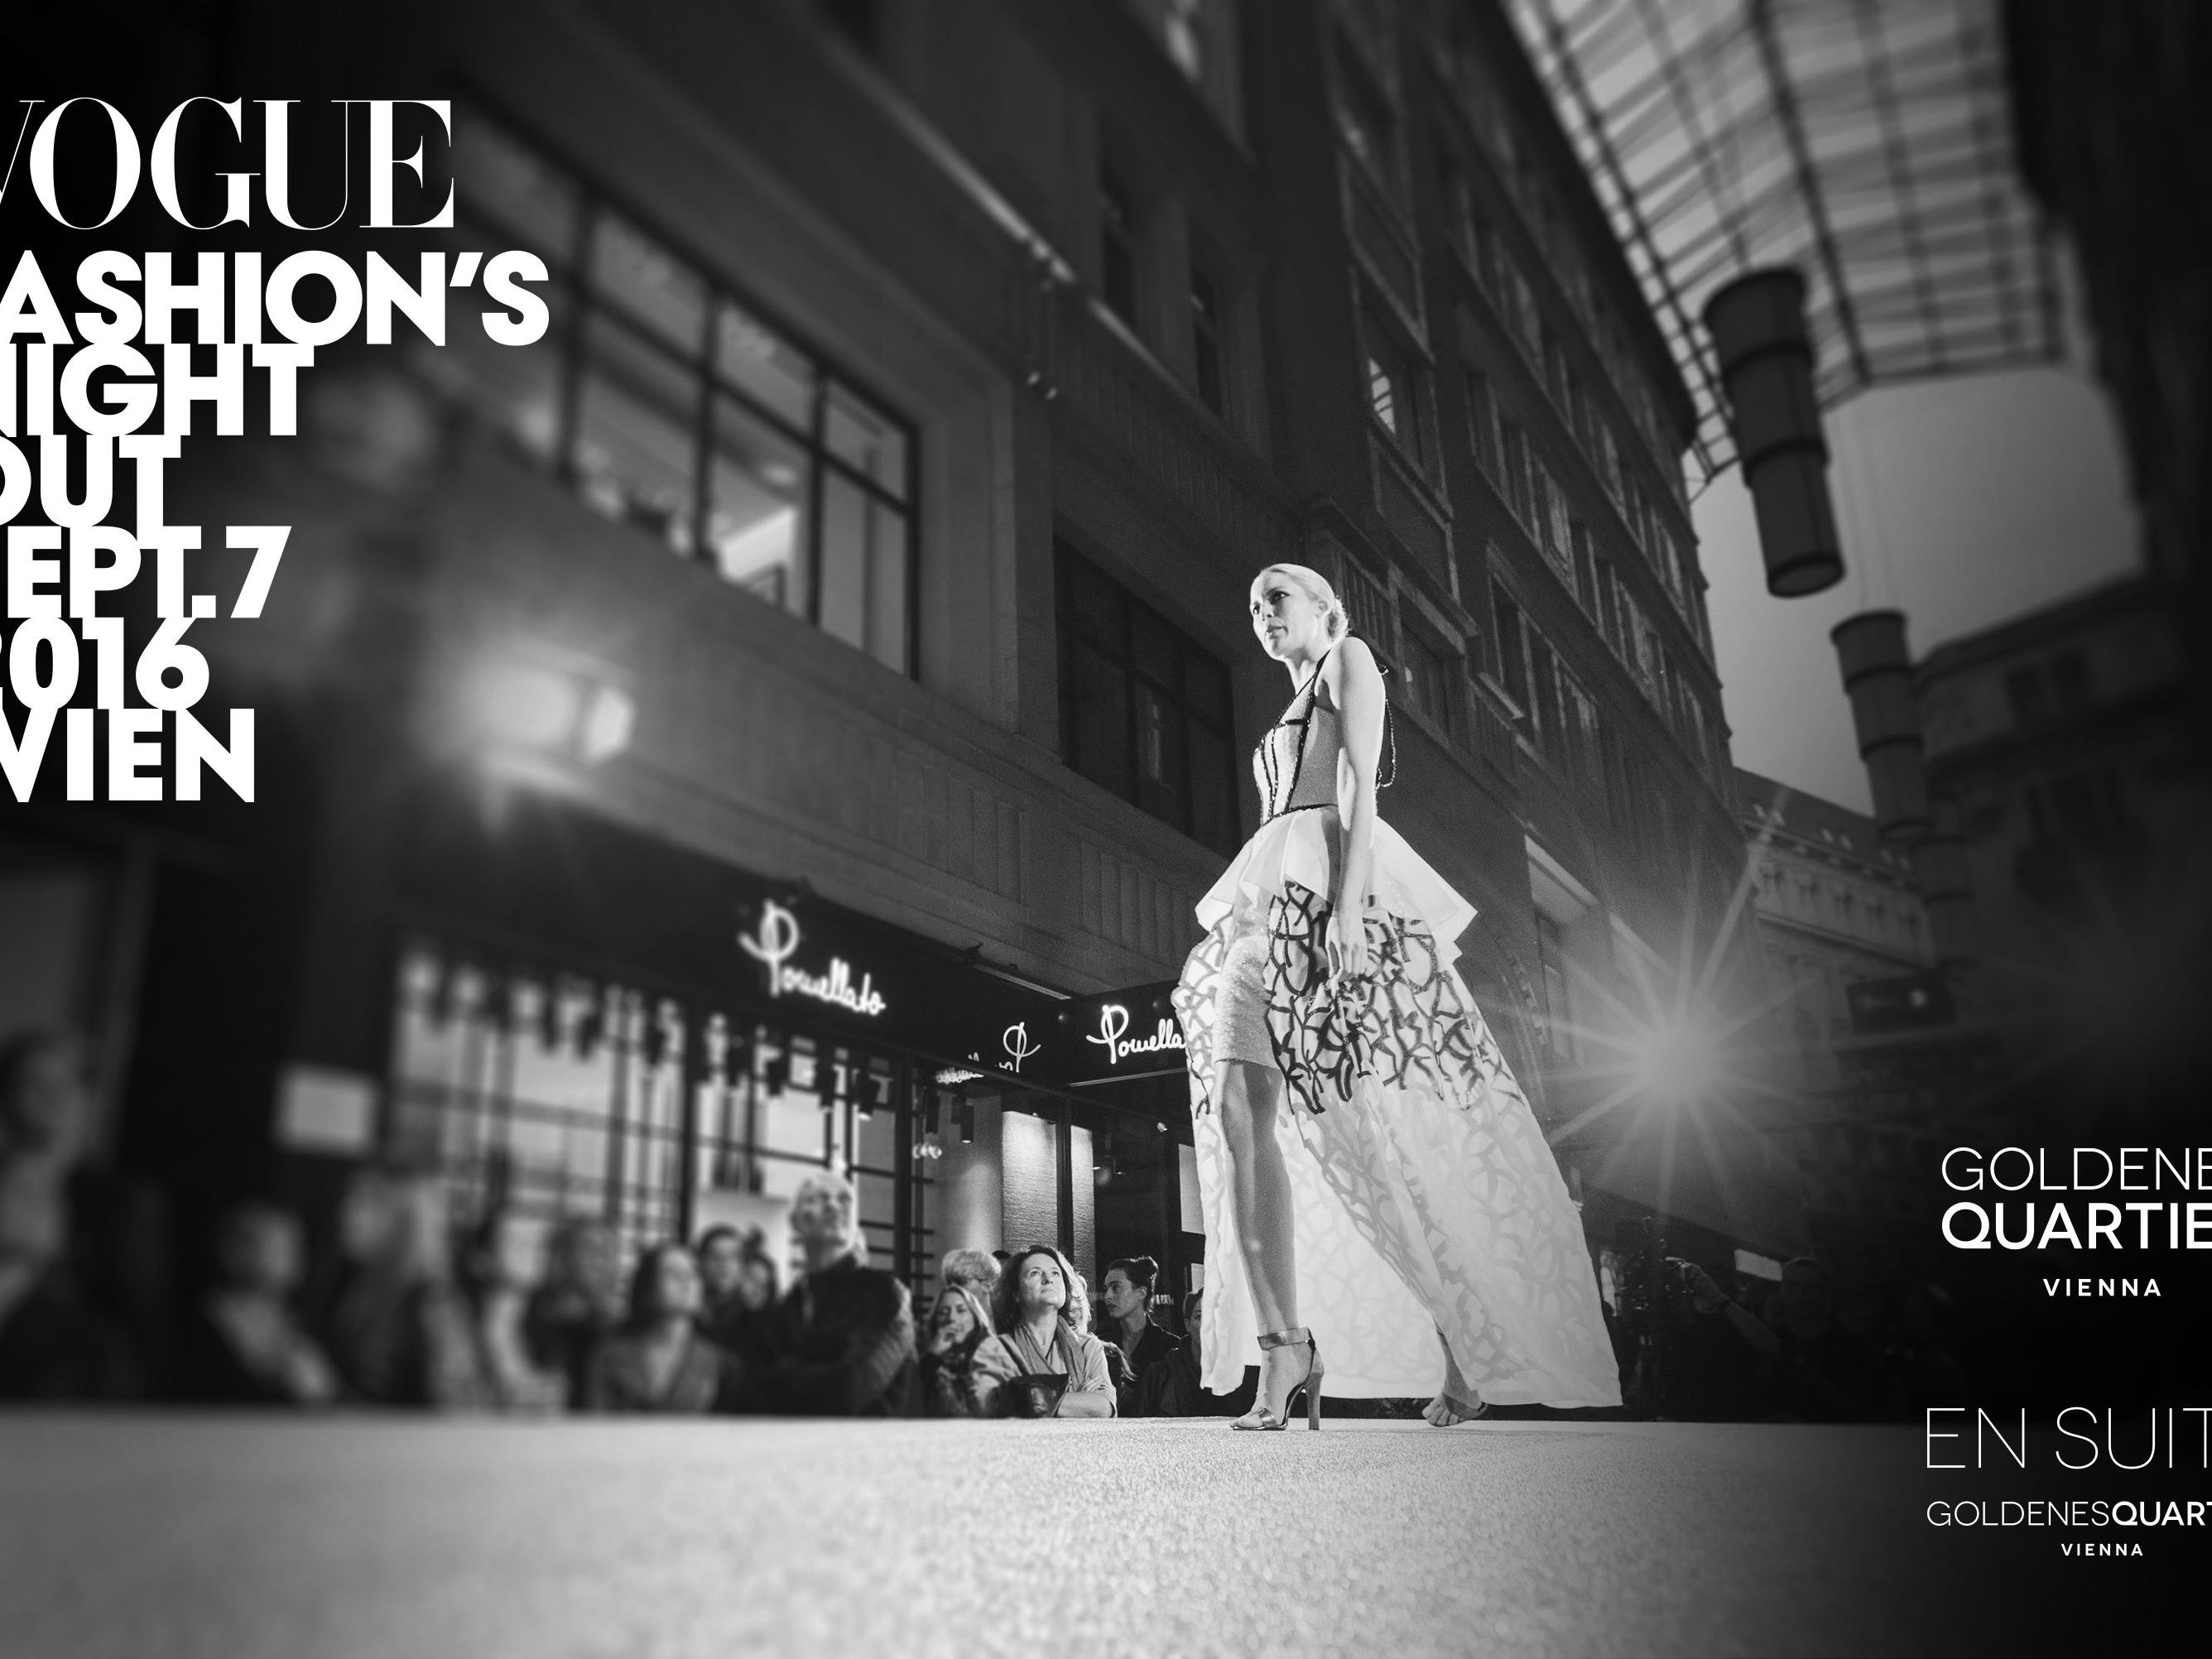 VOGUE Fashion's Night Out am 7. September in Wien.